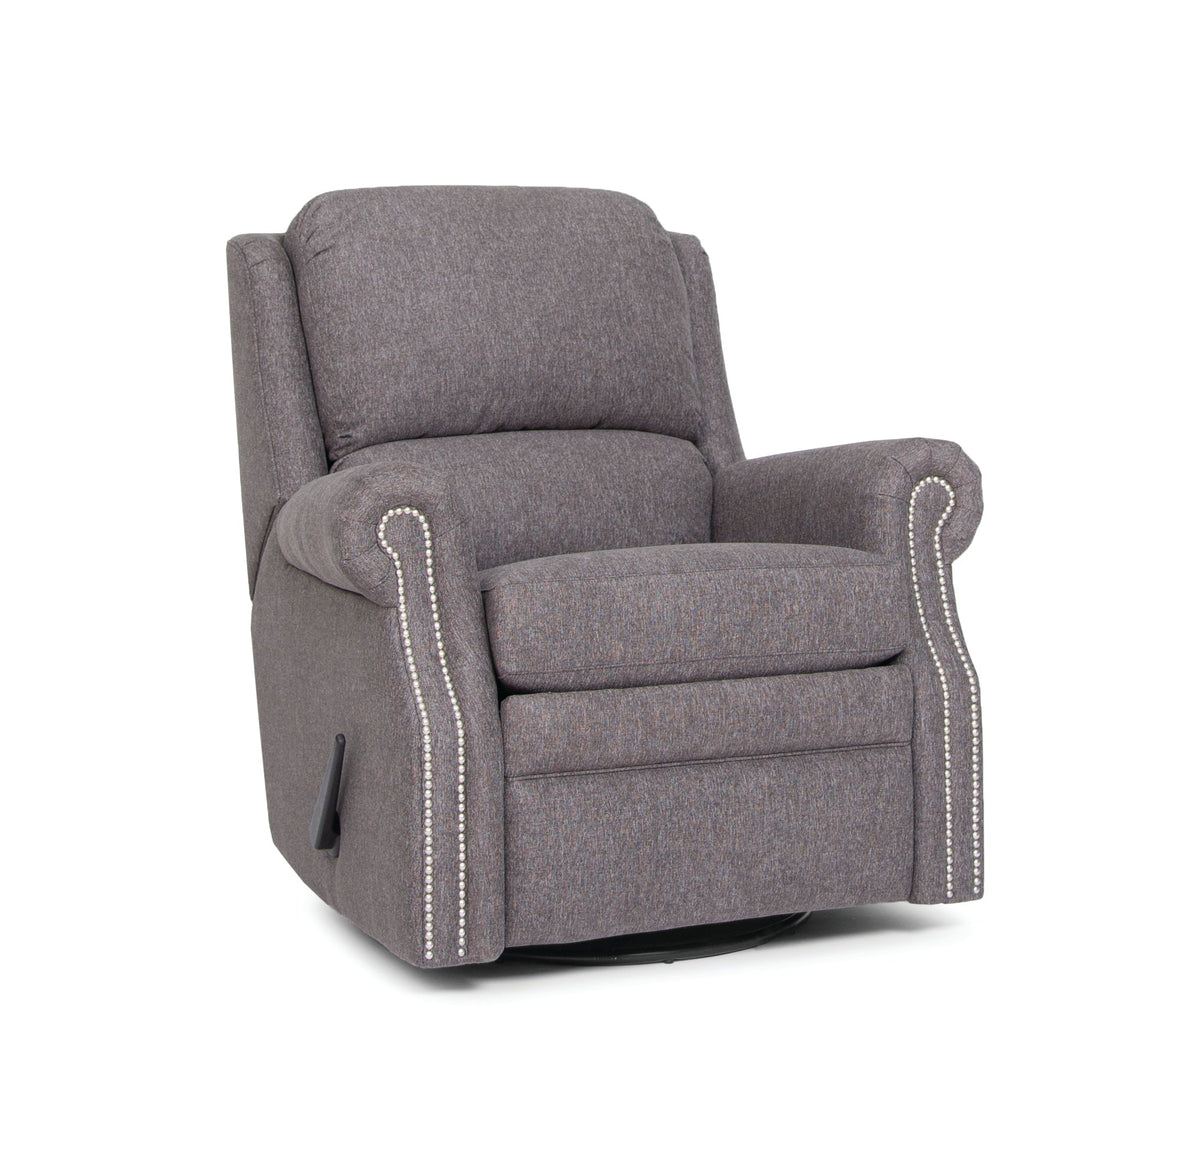 731 Style Manual Reclining Chair